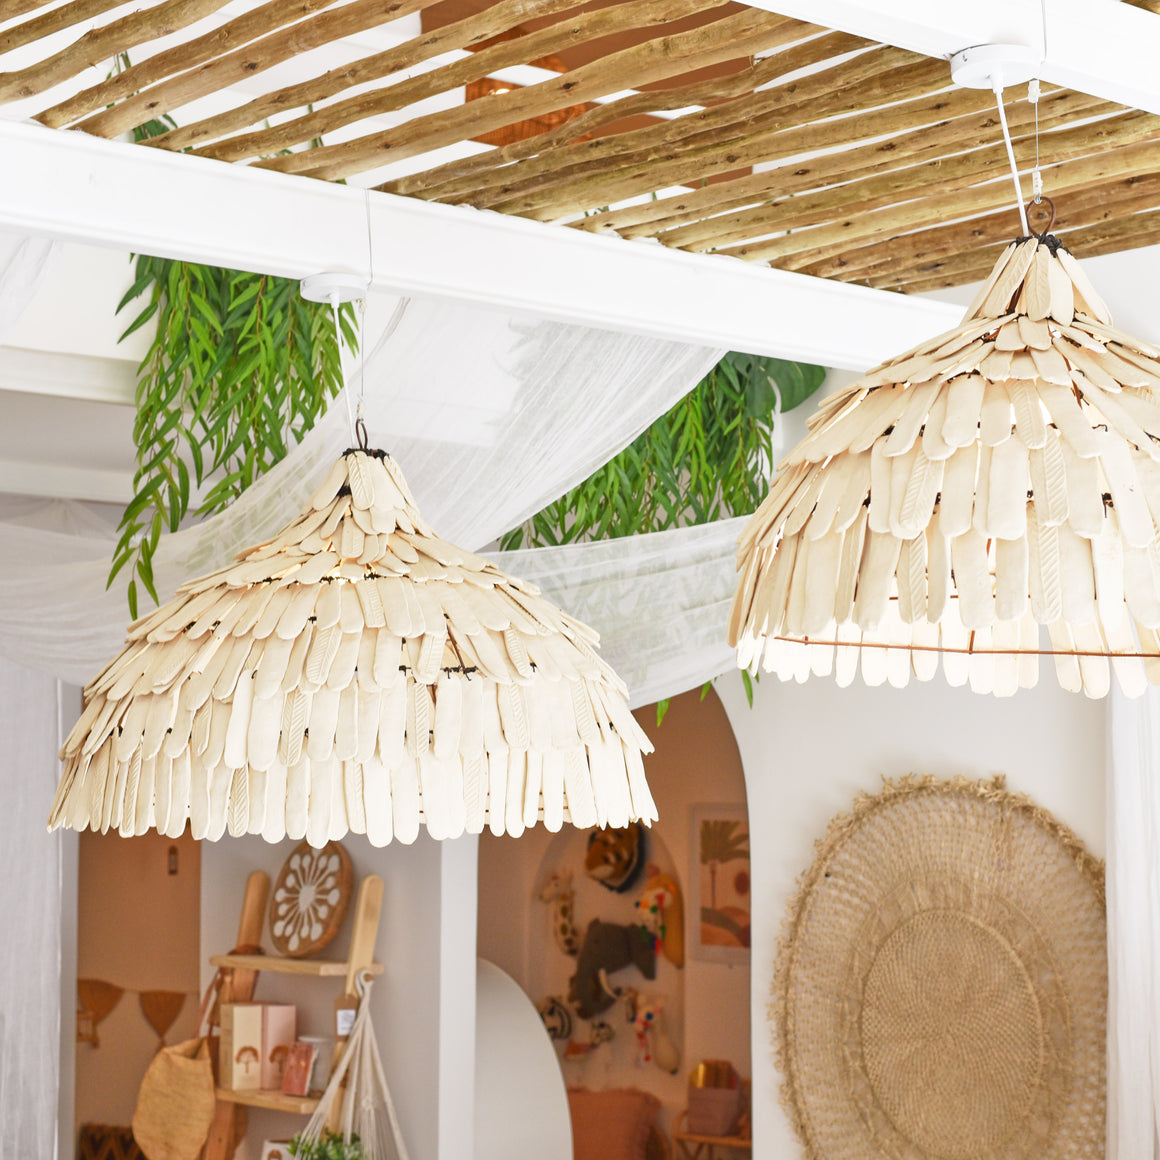 Clay Thatch Dome Light Shade